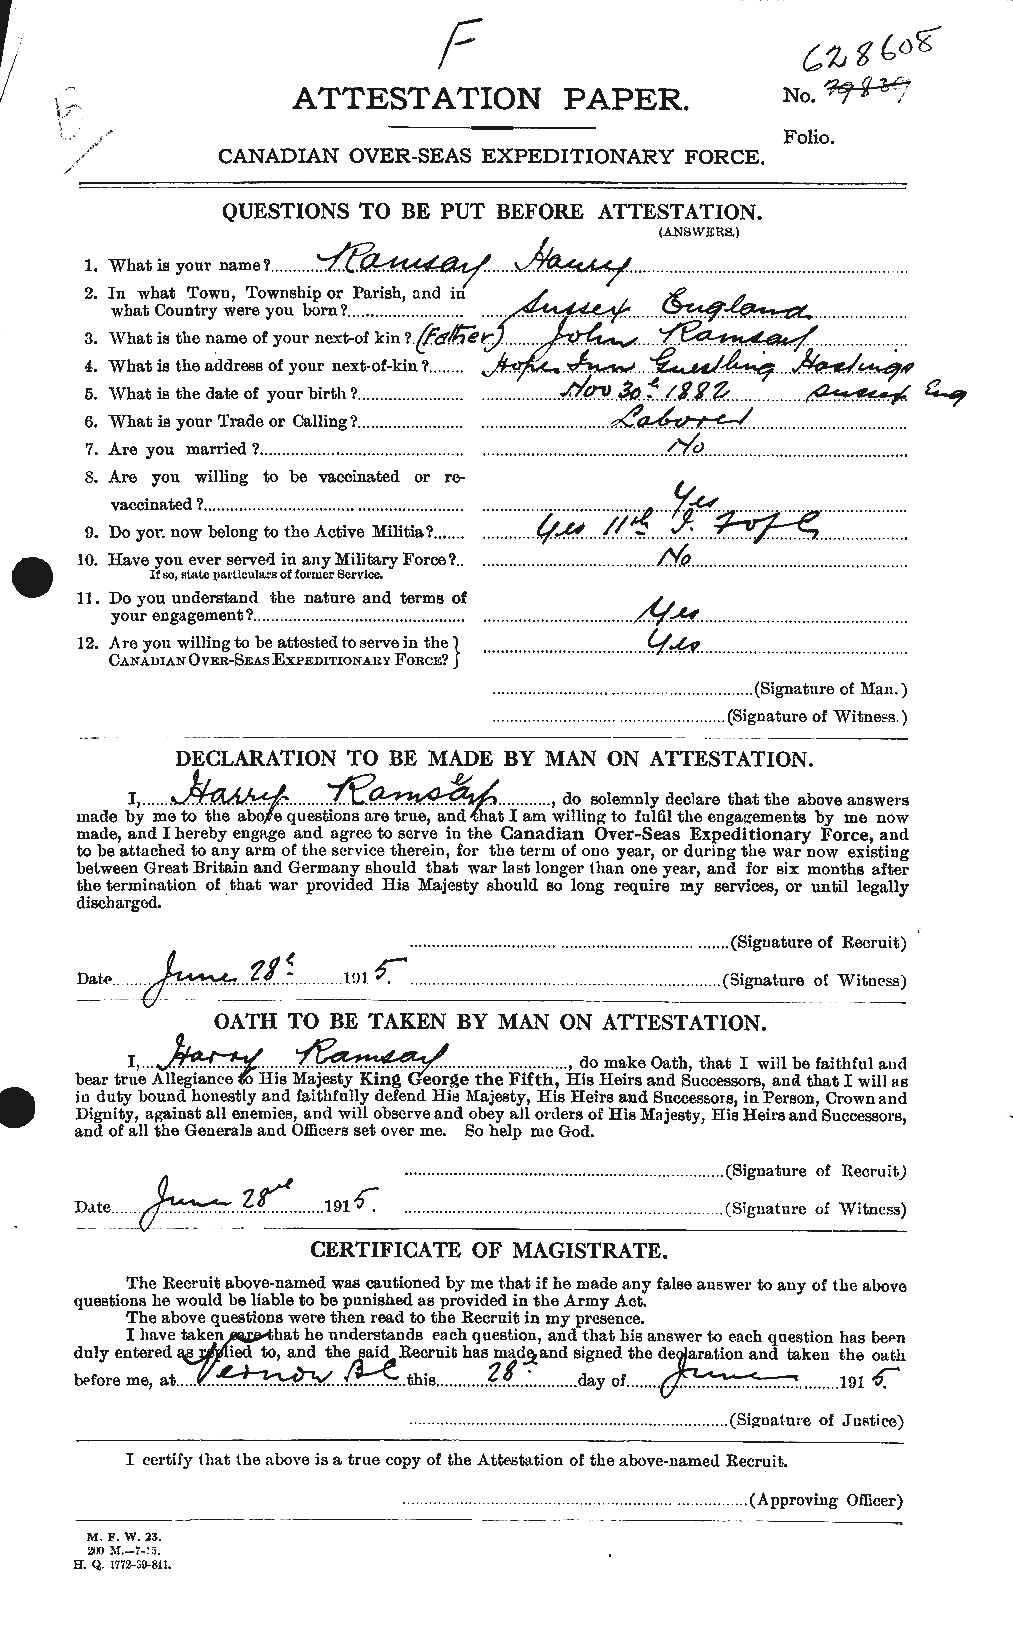 Personnel Records of the First World War - CEF 592499a